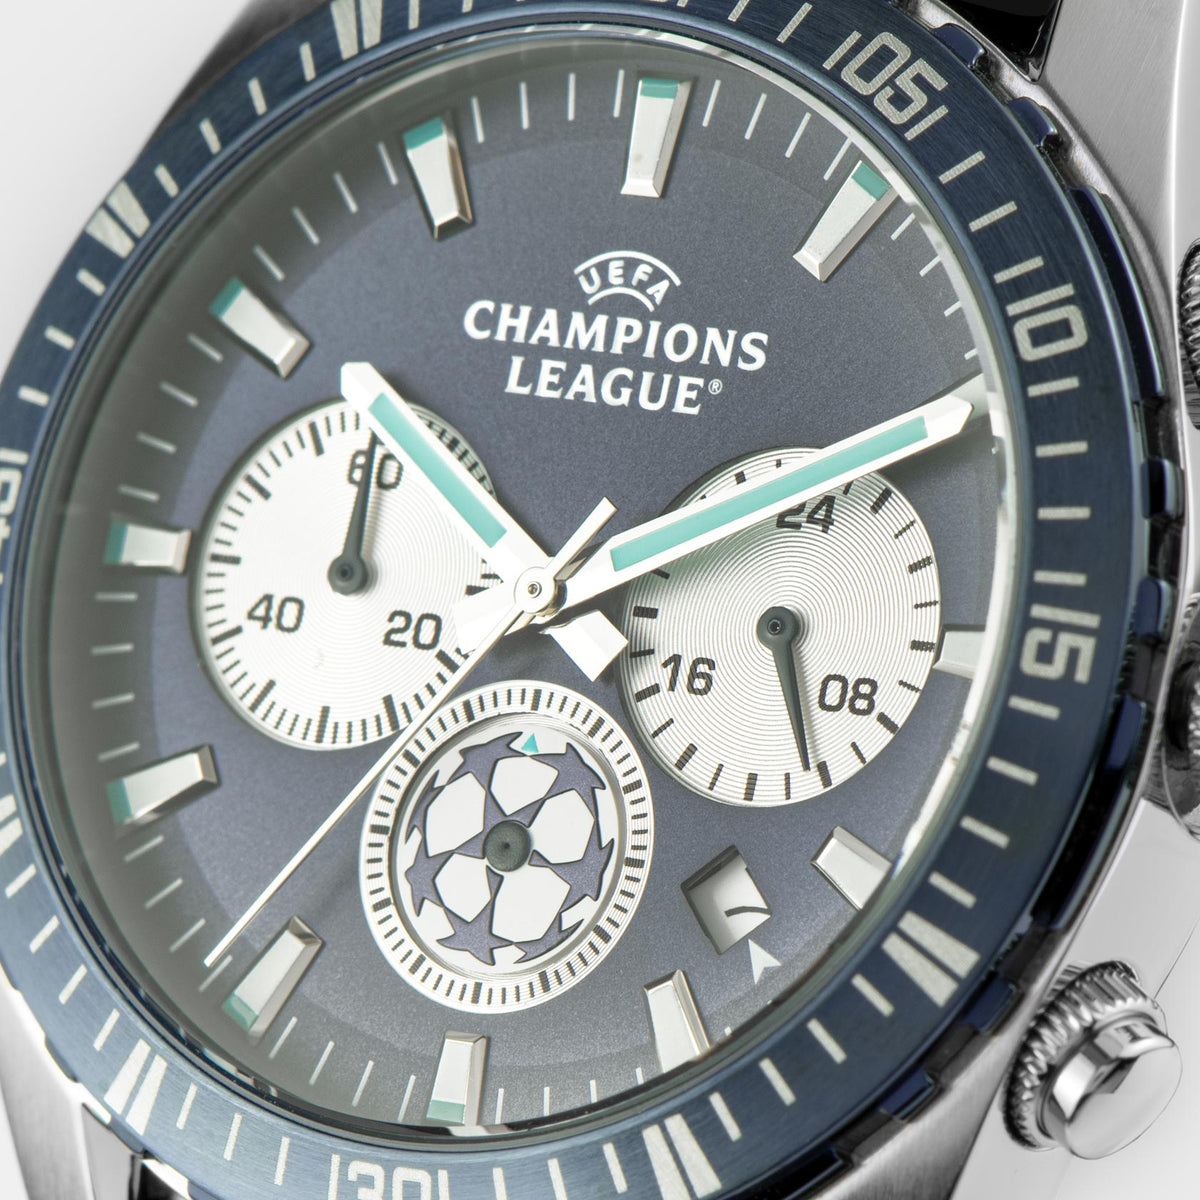 UCL Chronograph CL-102B Watch Club Online Competitions UEFA Store